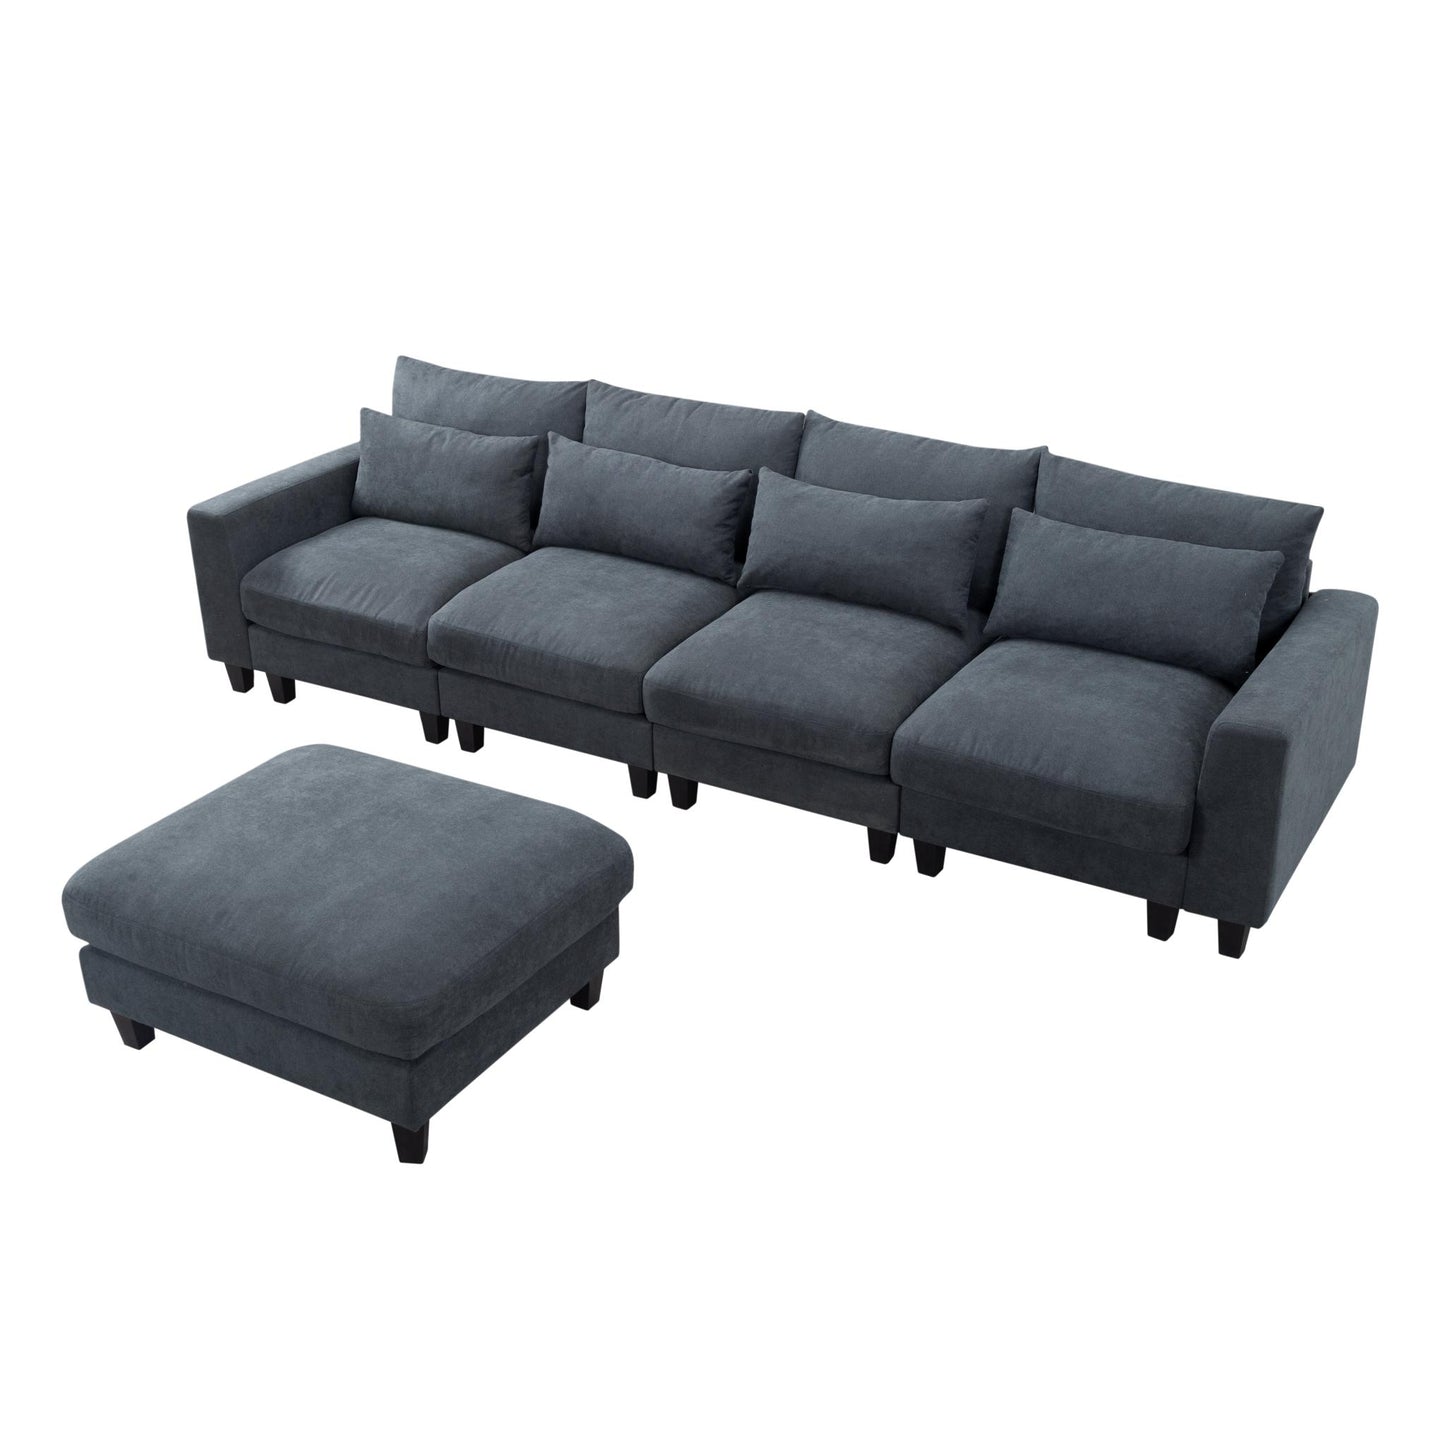 124.4” Modular L-Shaped Sectional Sofa with Ottoman